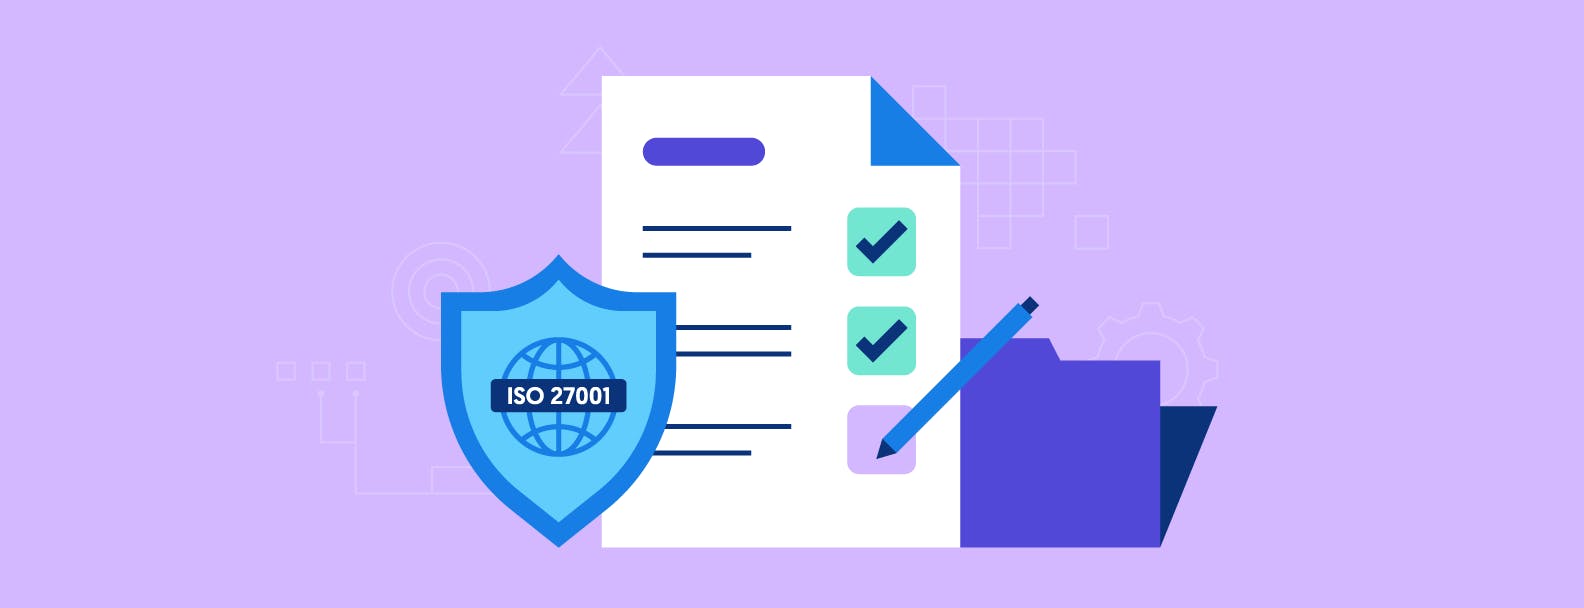 Illustration of an ISO 27001 checklist and an ISO 27001 shield in front of a light purple background